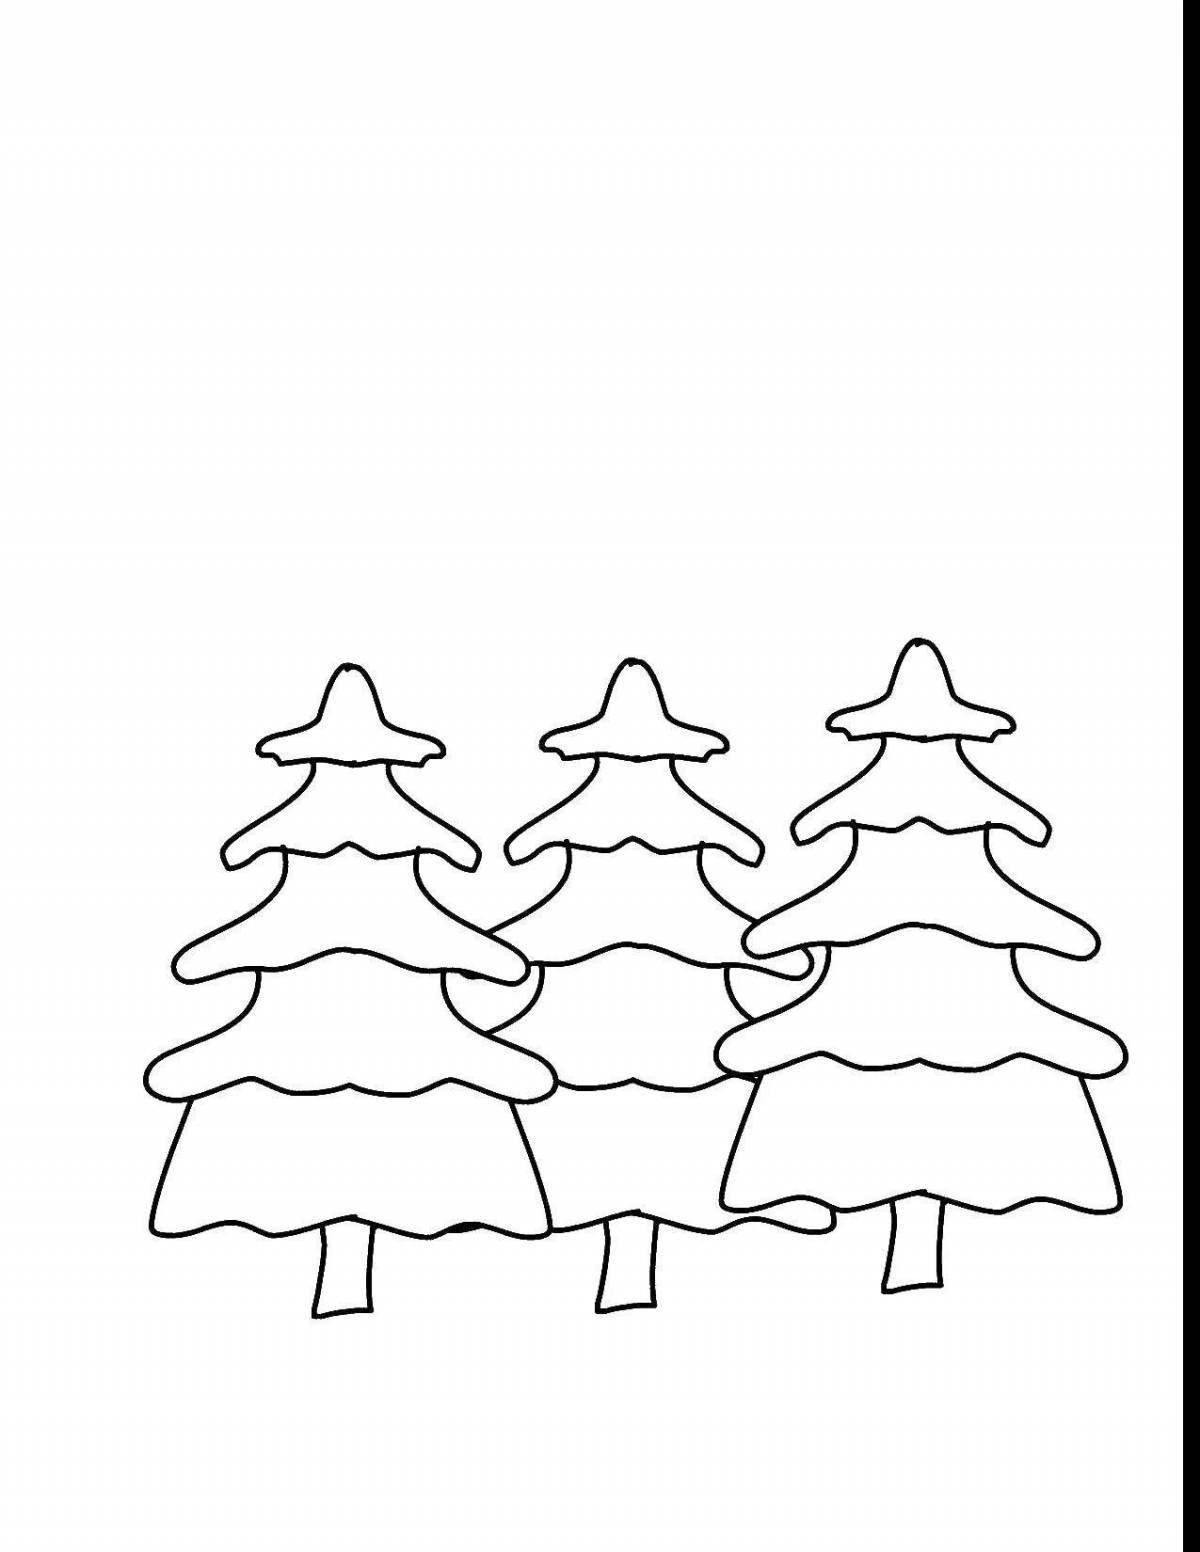 Gorgeous Christmas tree coloring book in winter